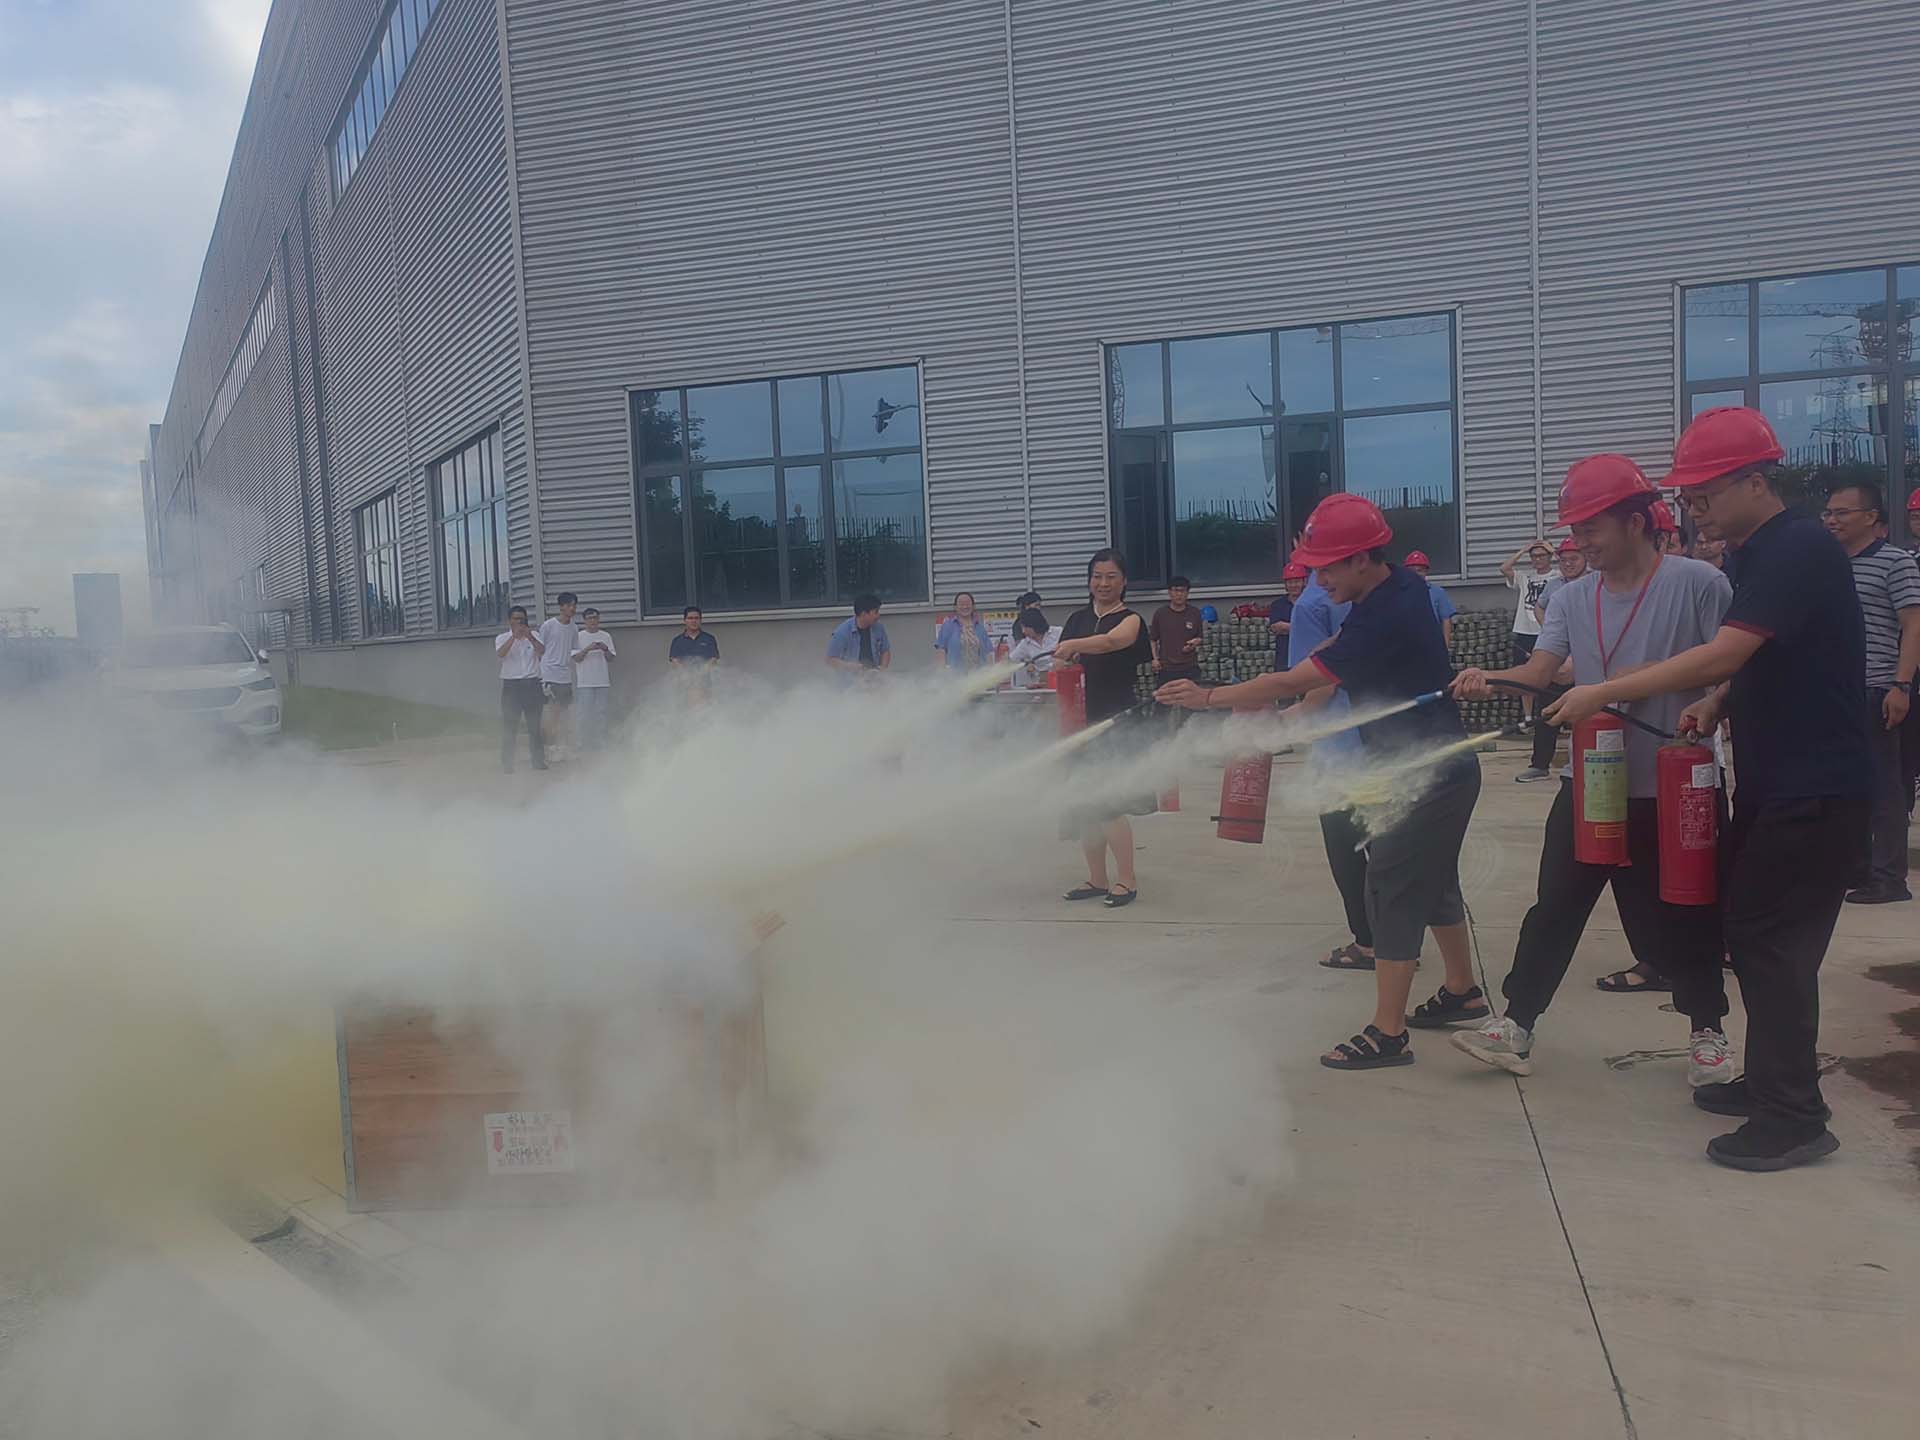 Penta Laser held a fire safety education activity to build a solid safety line